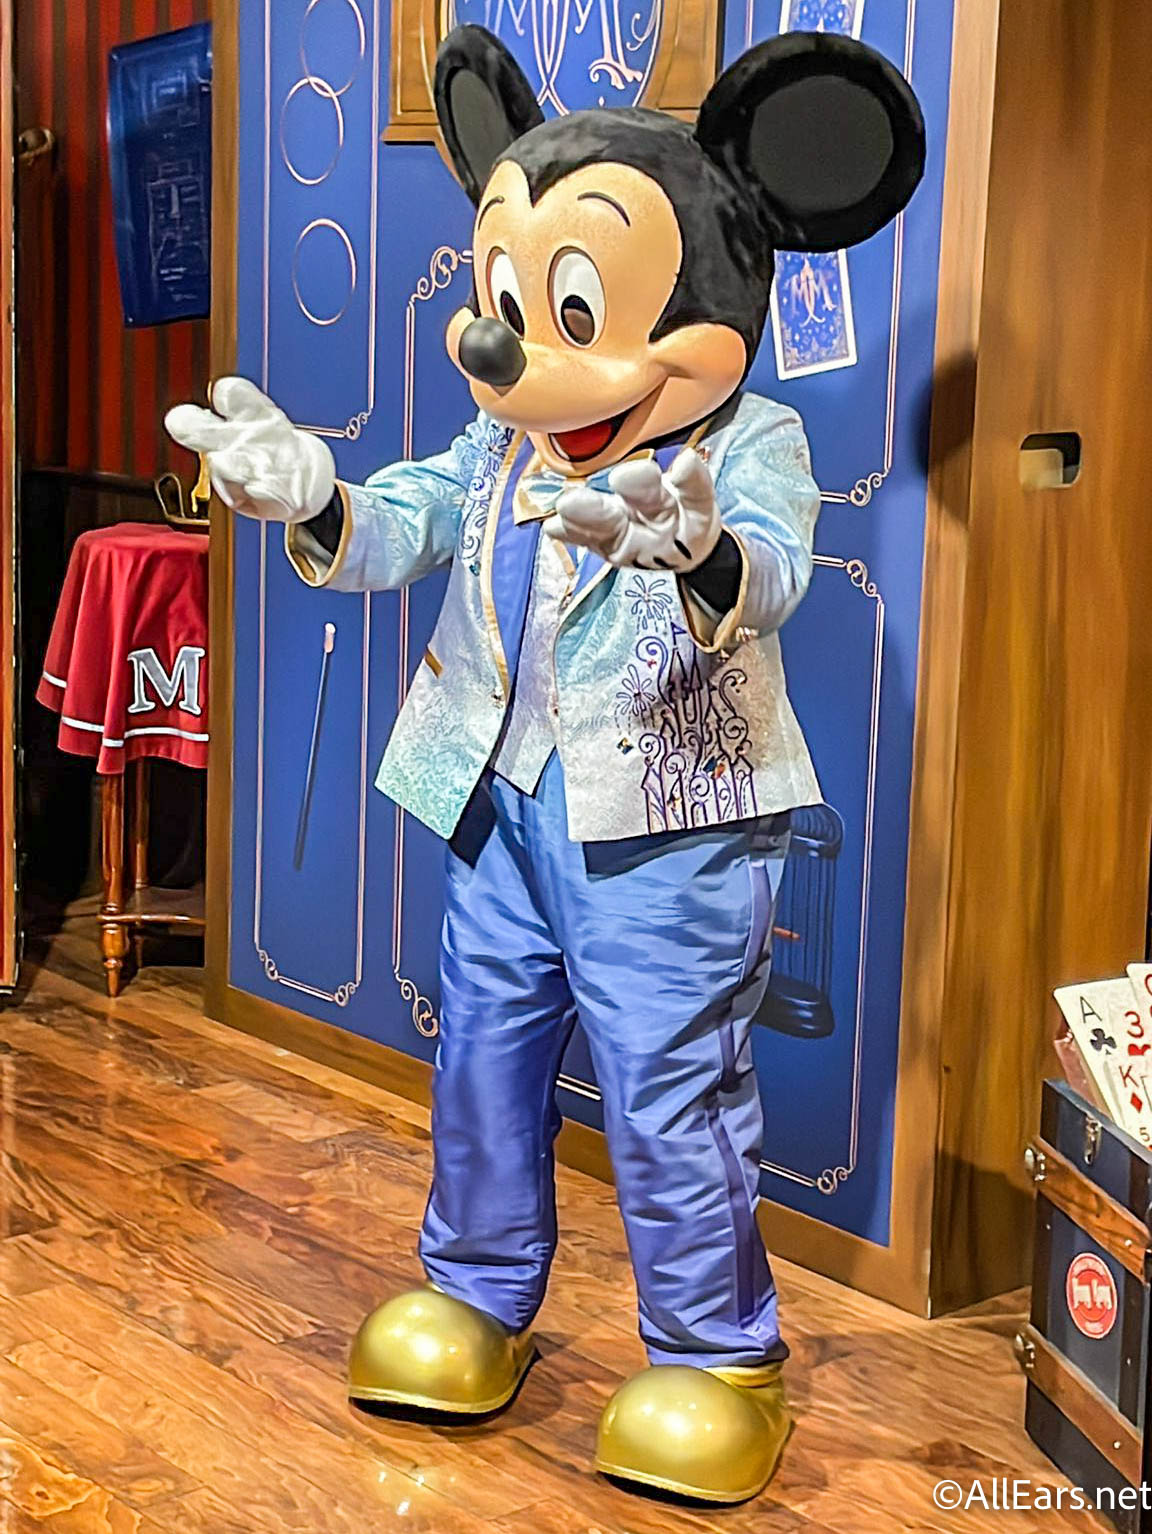 wdw 2021 magic kingdom town square theater mickey mouse meet and greet  character sighting modified 50th anniversary costume-21 - AllEars.Net